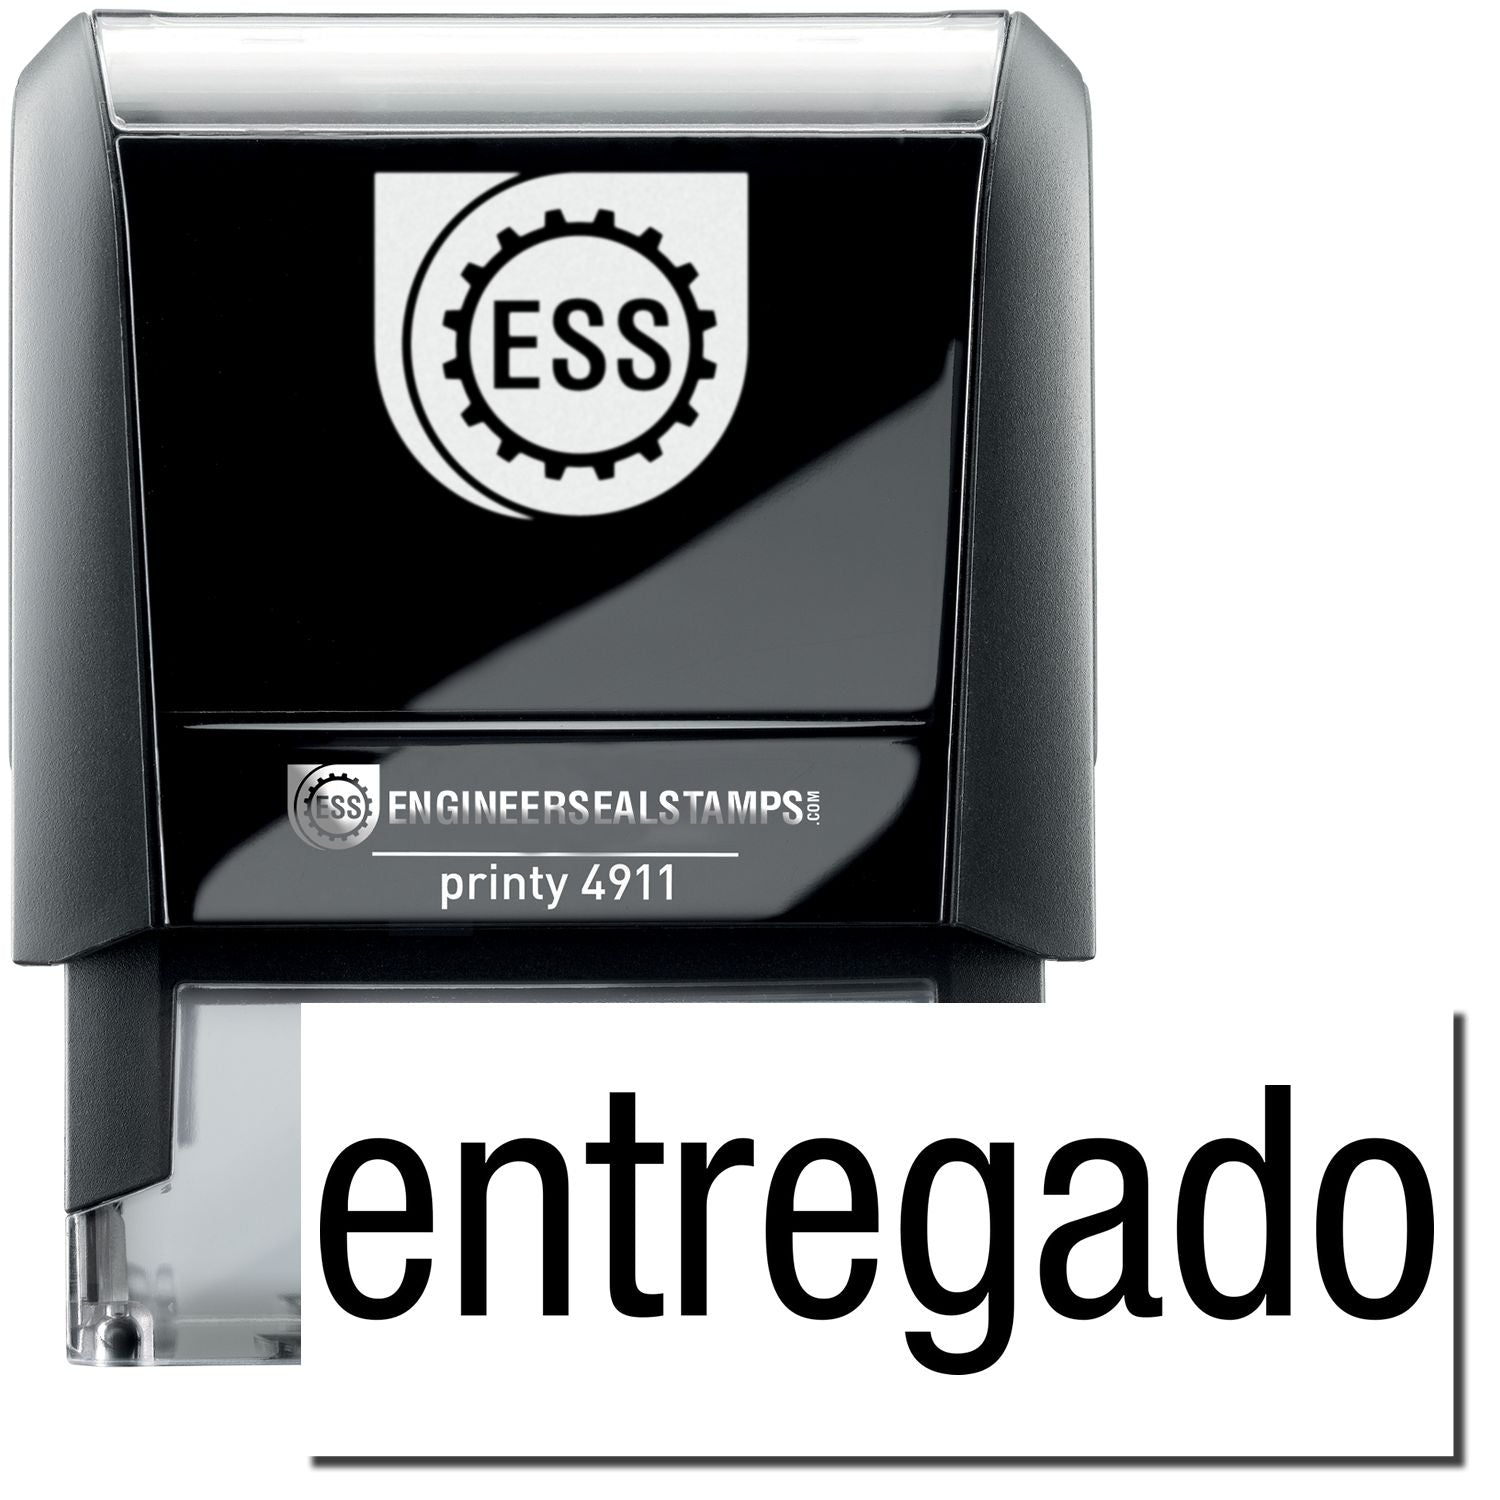 A self-inking stamp with a stamped image showing how the text "entregado" is displayed after stamping.